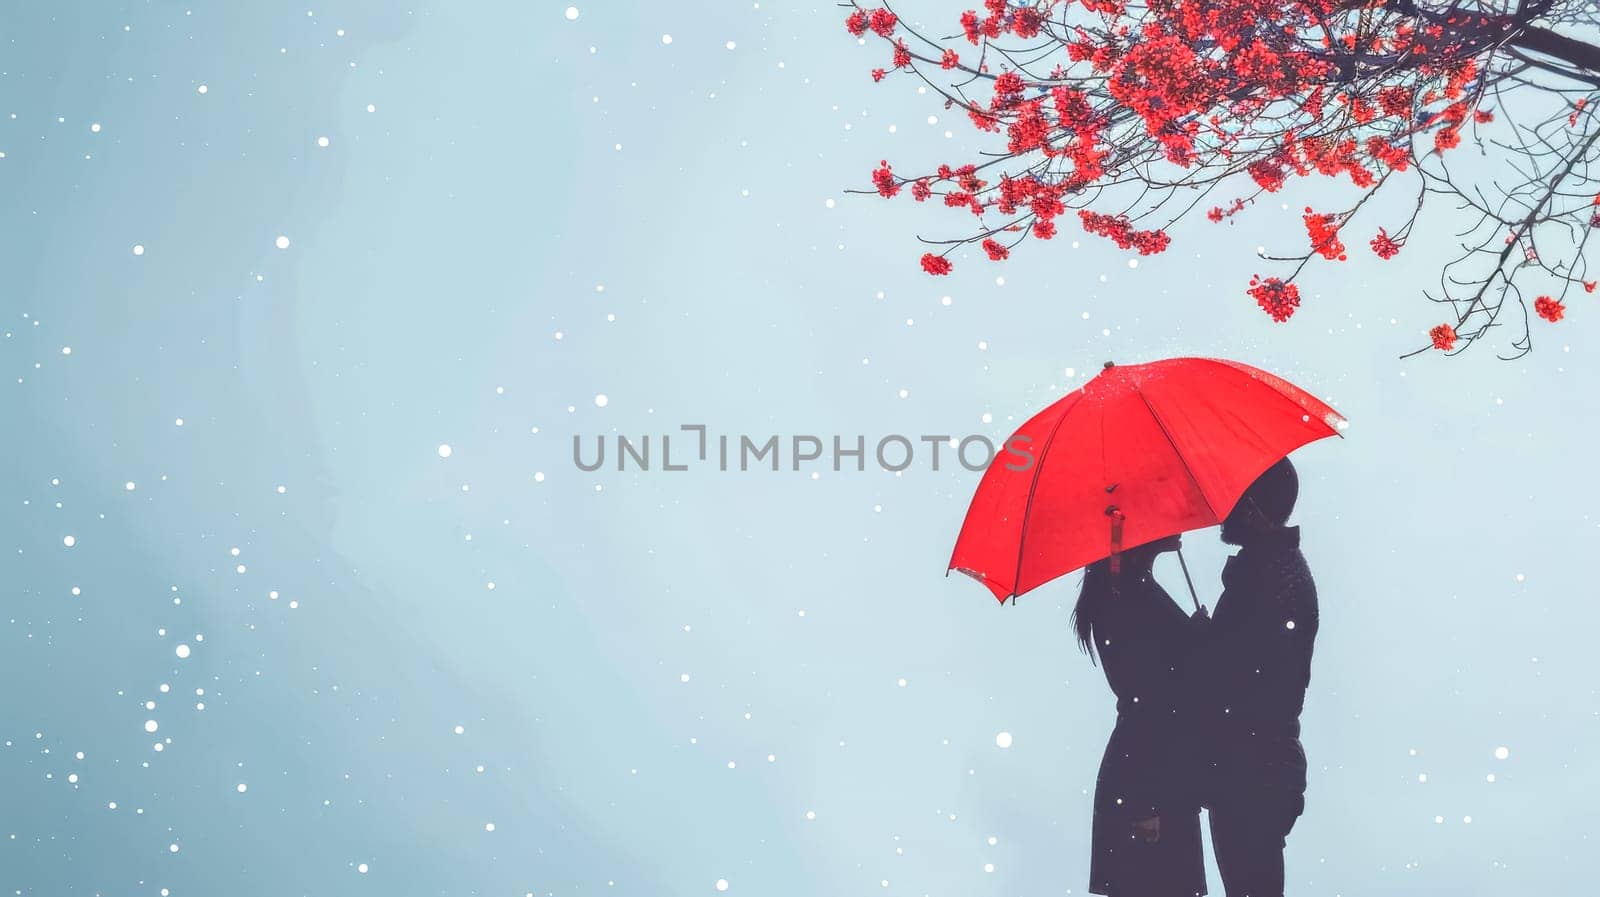 Silhouette of a person under a bright red umbrella against snowy backdrop with red berries